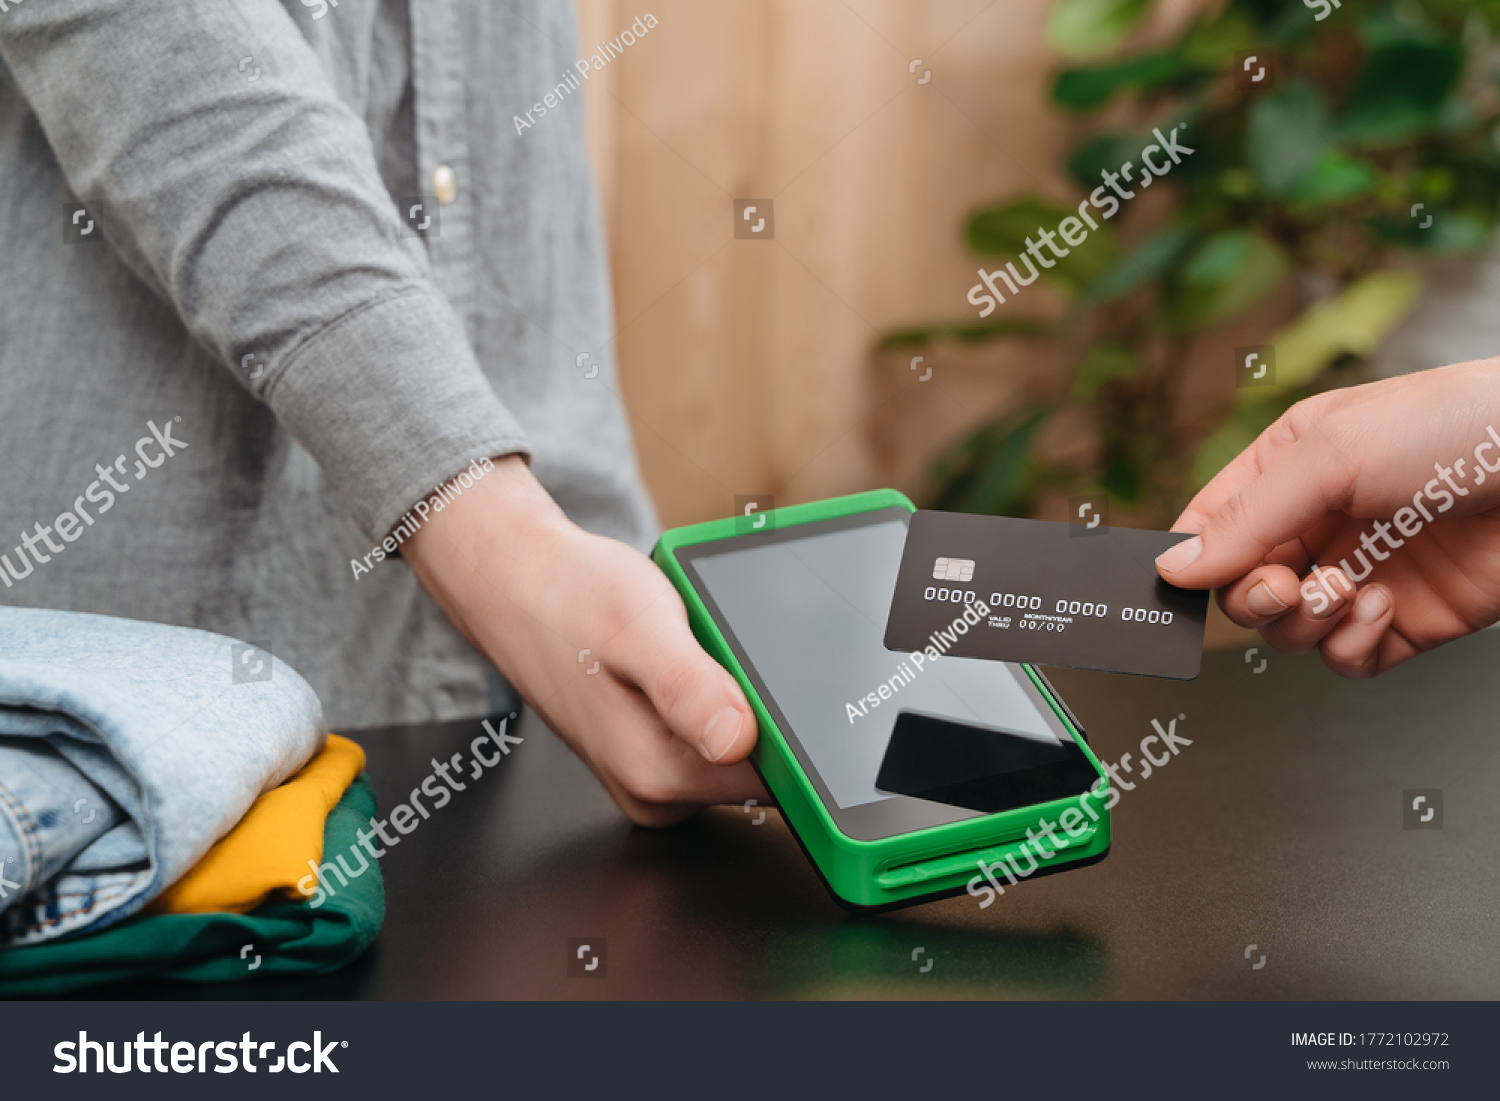 Client's hand holding bank credit card near nfc payment terminal in hand of cashier in clothing store. Customer makes purchases with credit card. Contactless, mobile, express payment, nfc concept  #1772102972